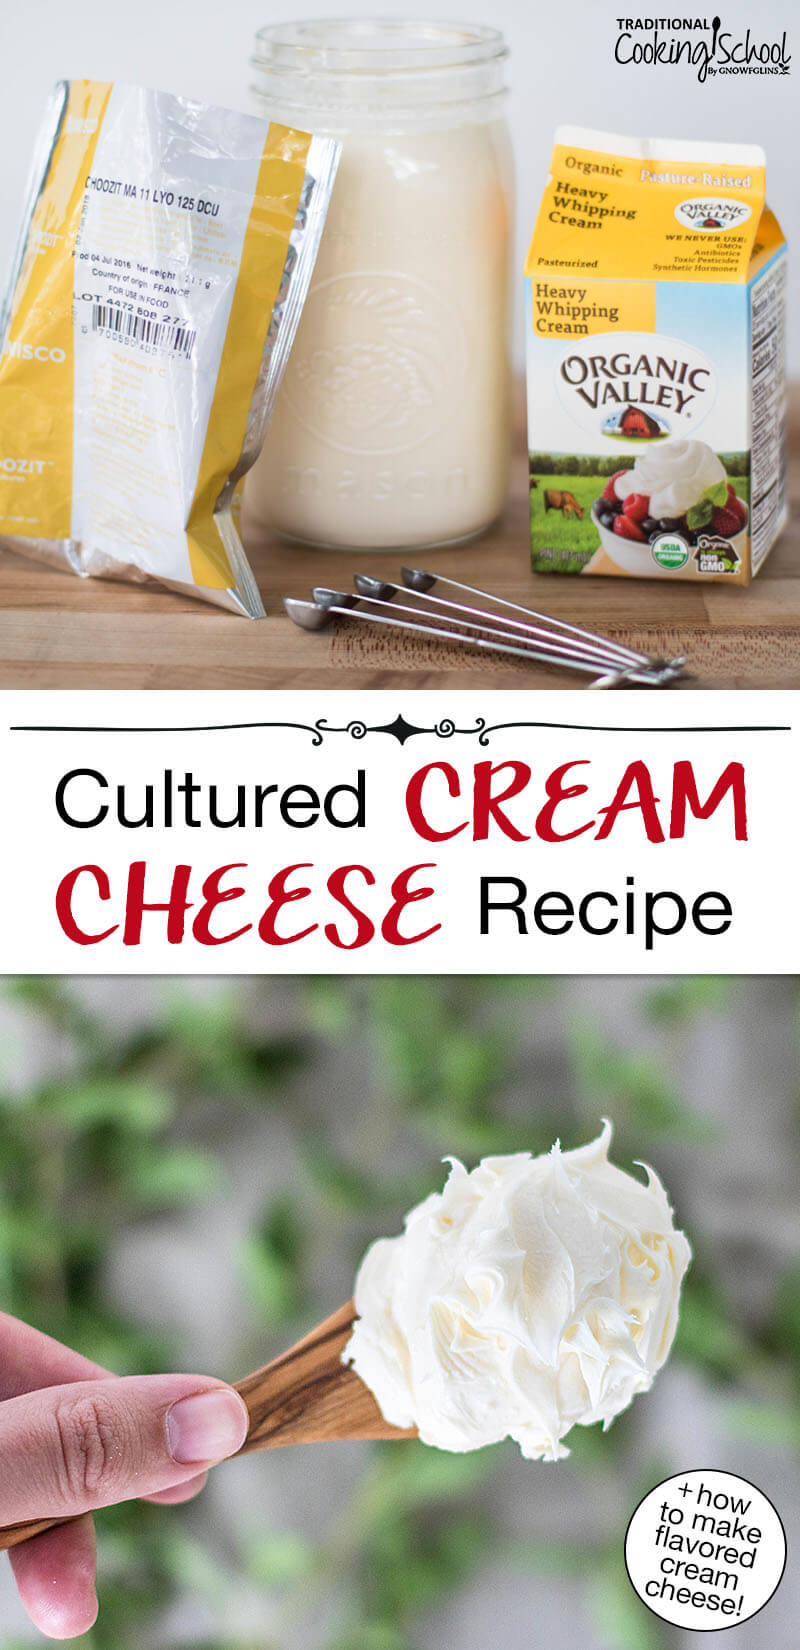 Photo collage of a spoonful of cream cheese, and the ingredients and equipment needed for making homemade cream cheese (starter culture, cream, measuring spoons, glass jar). Text overlay says: "Cultured Cream Cheese Recipe (+how to make flavored cream cheese)"